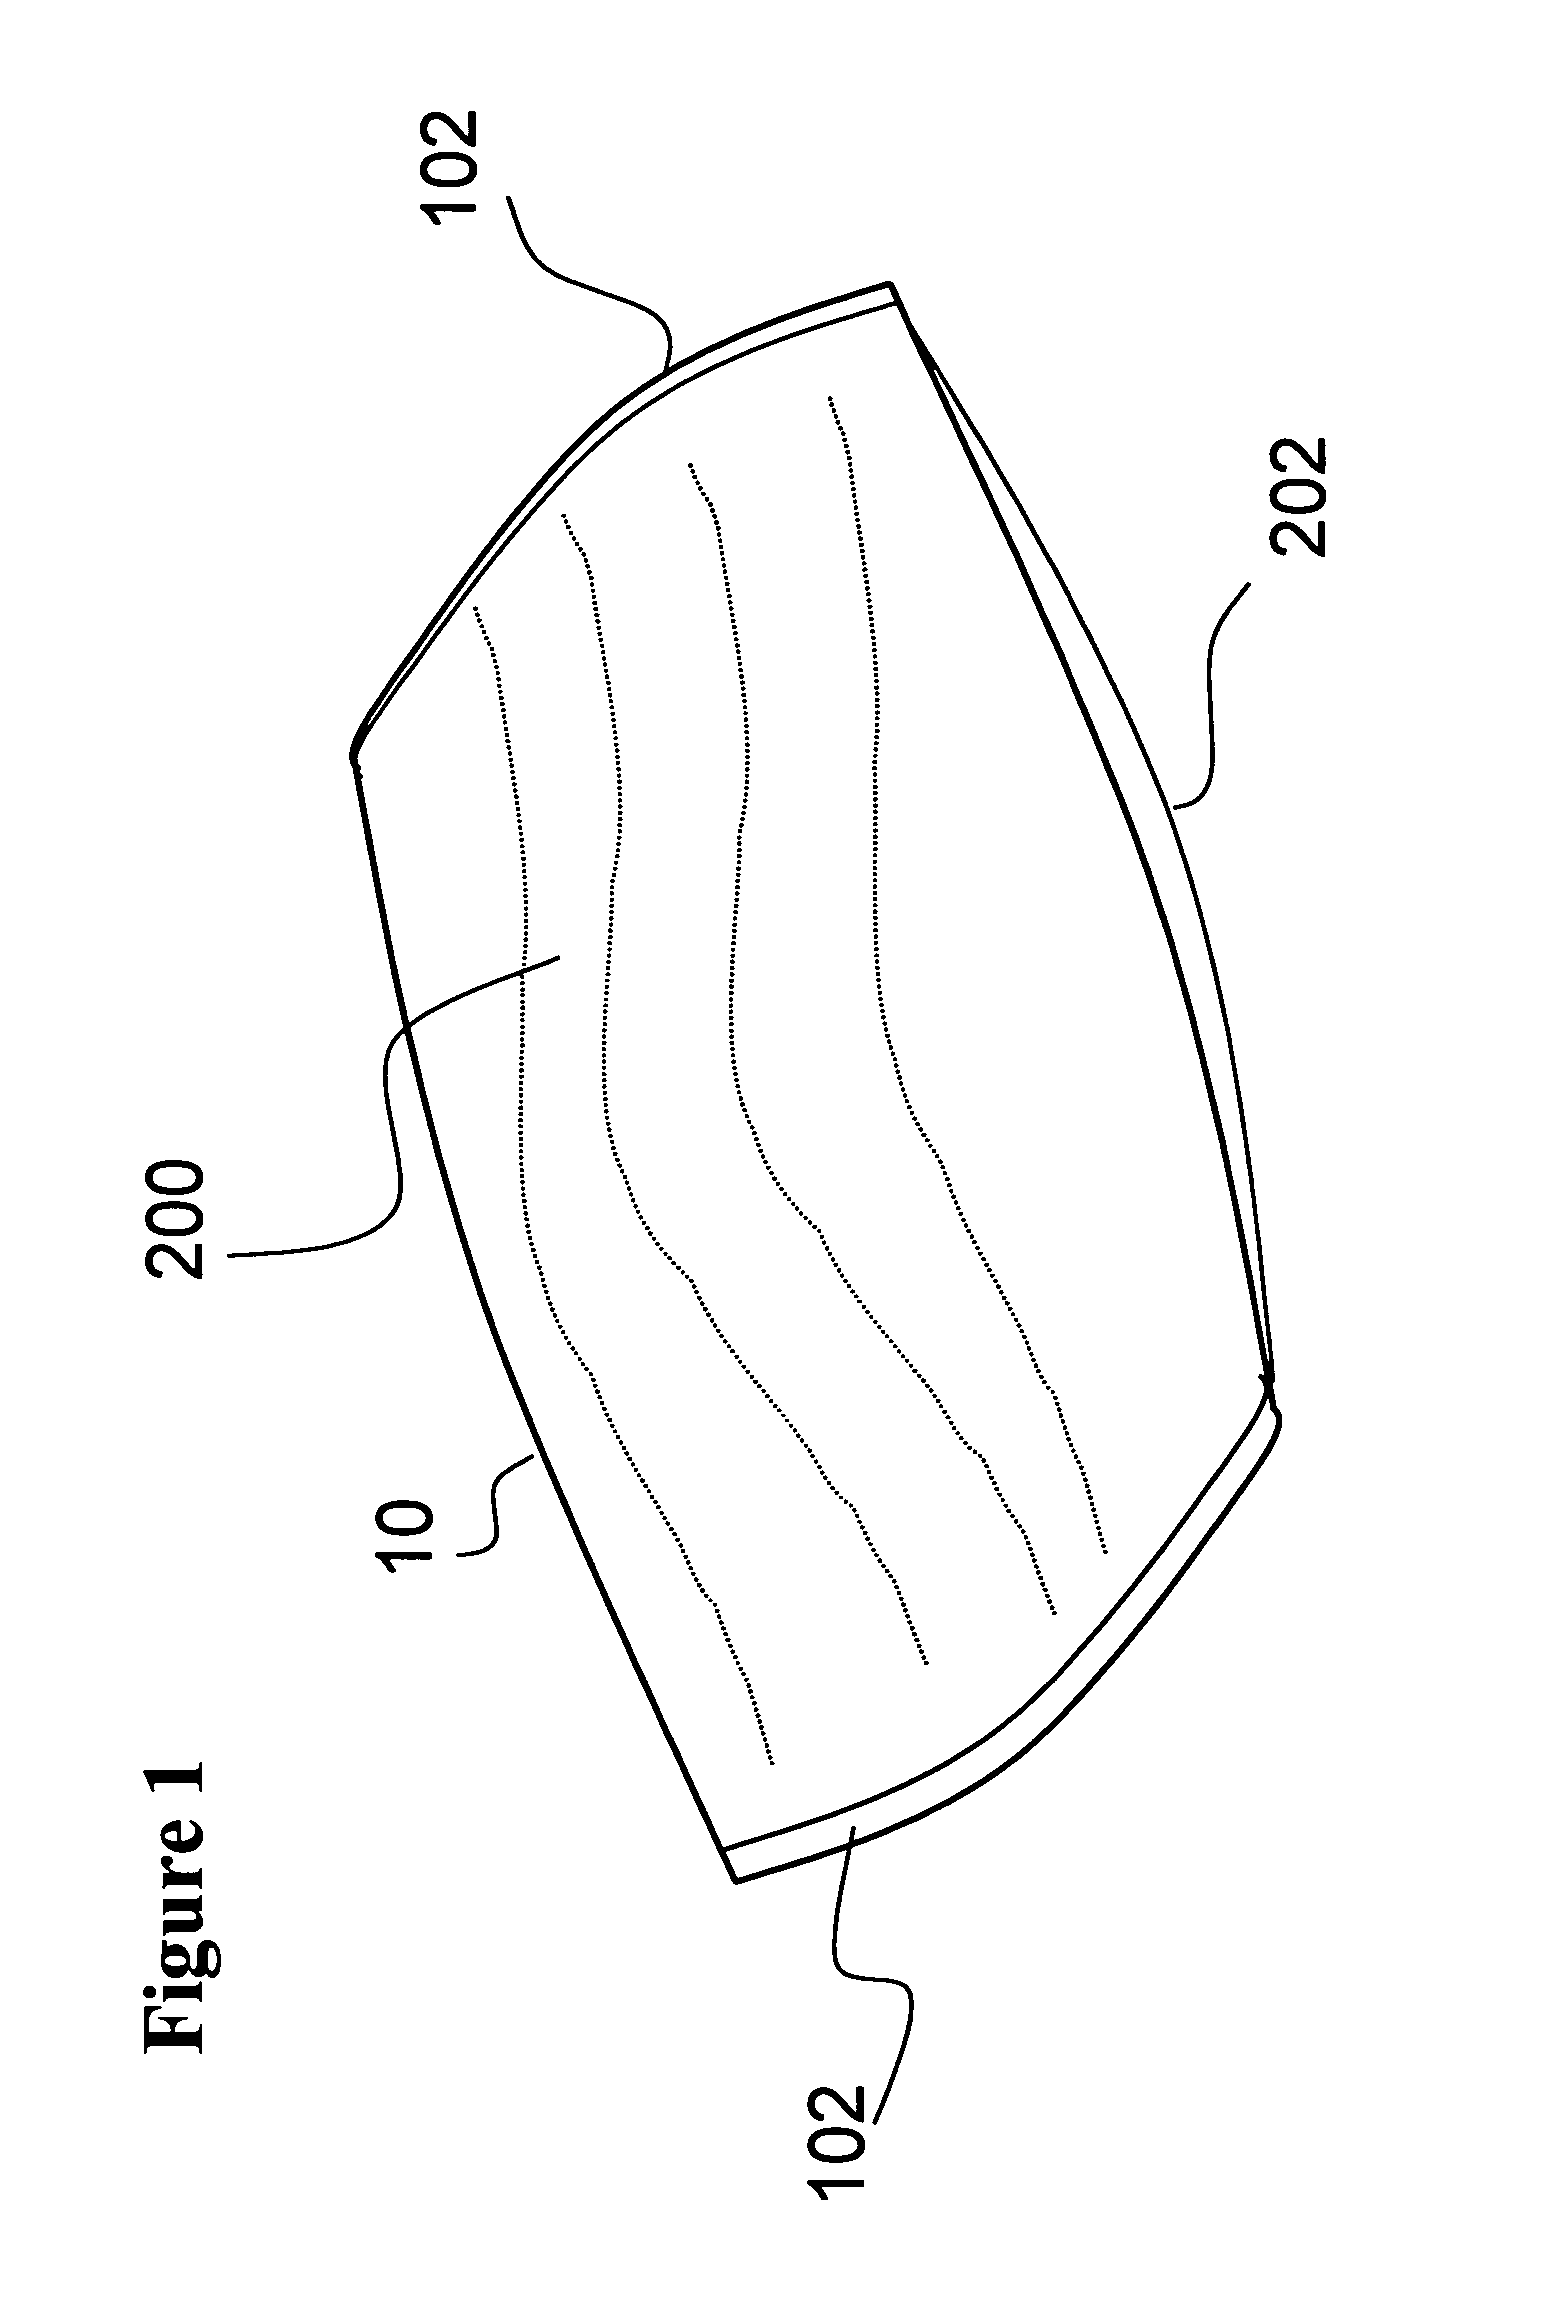 Nutritional composition and a container for the convenient transport and storage of the nutritional composition